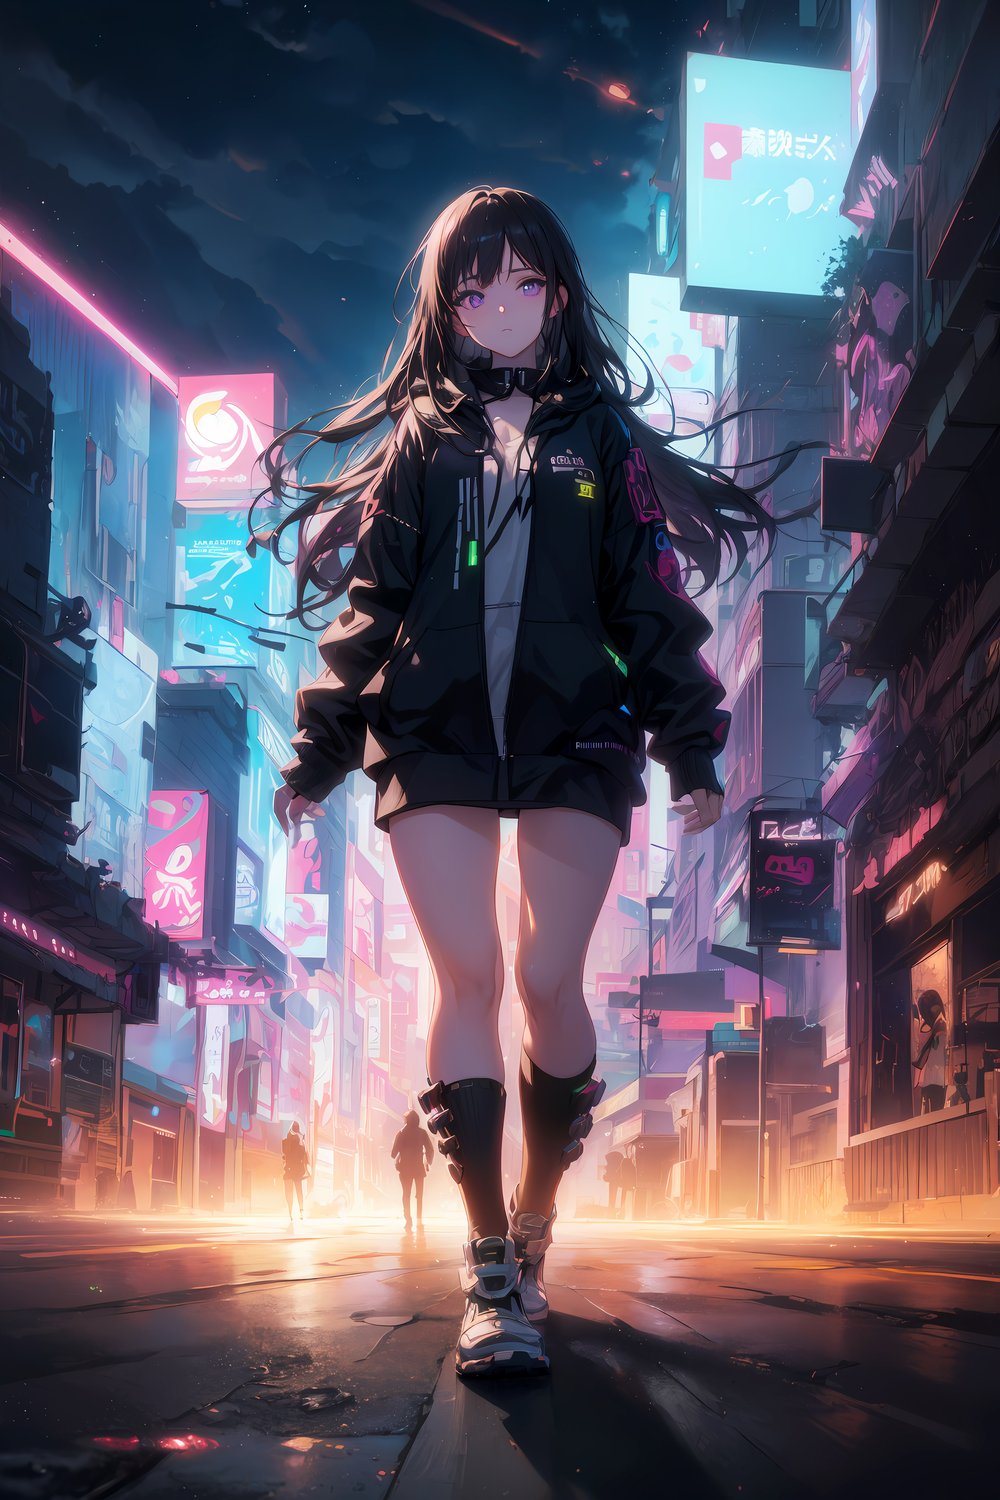 Cyberpunk Anime Girl 4K Wallpaper: Futuristic Style Meets Stunning Visuals for Your Screen